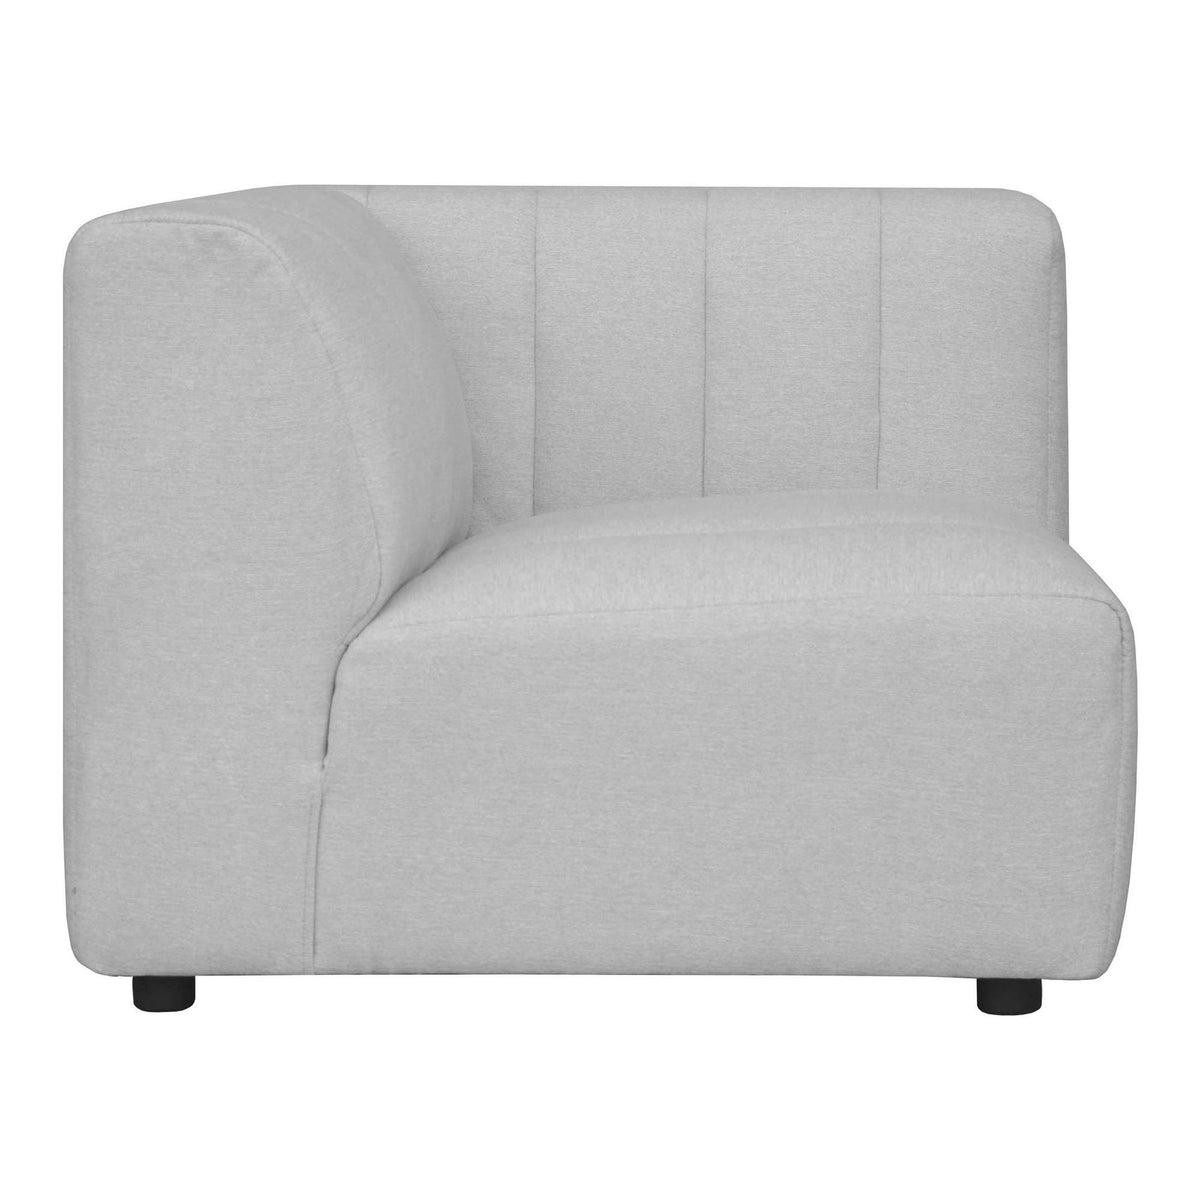 Moe's Home Collection Lyric Corner Chair Oatmeal - MT-1025-34